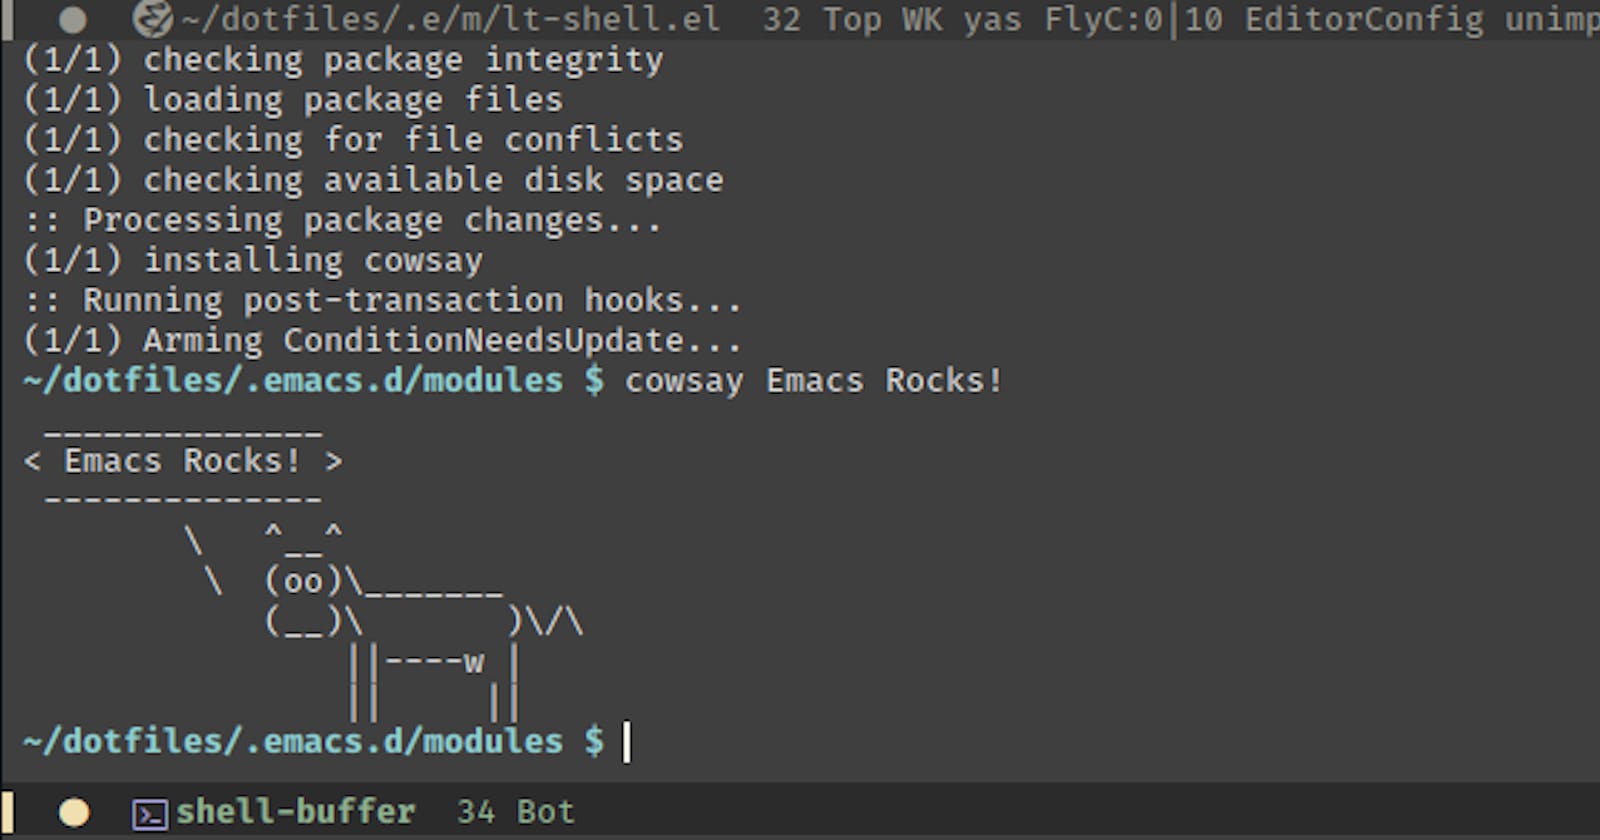 Simple shell pop-up in Emacs